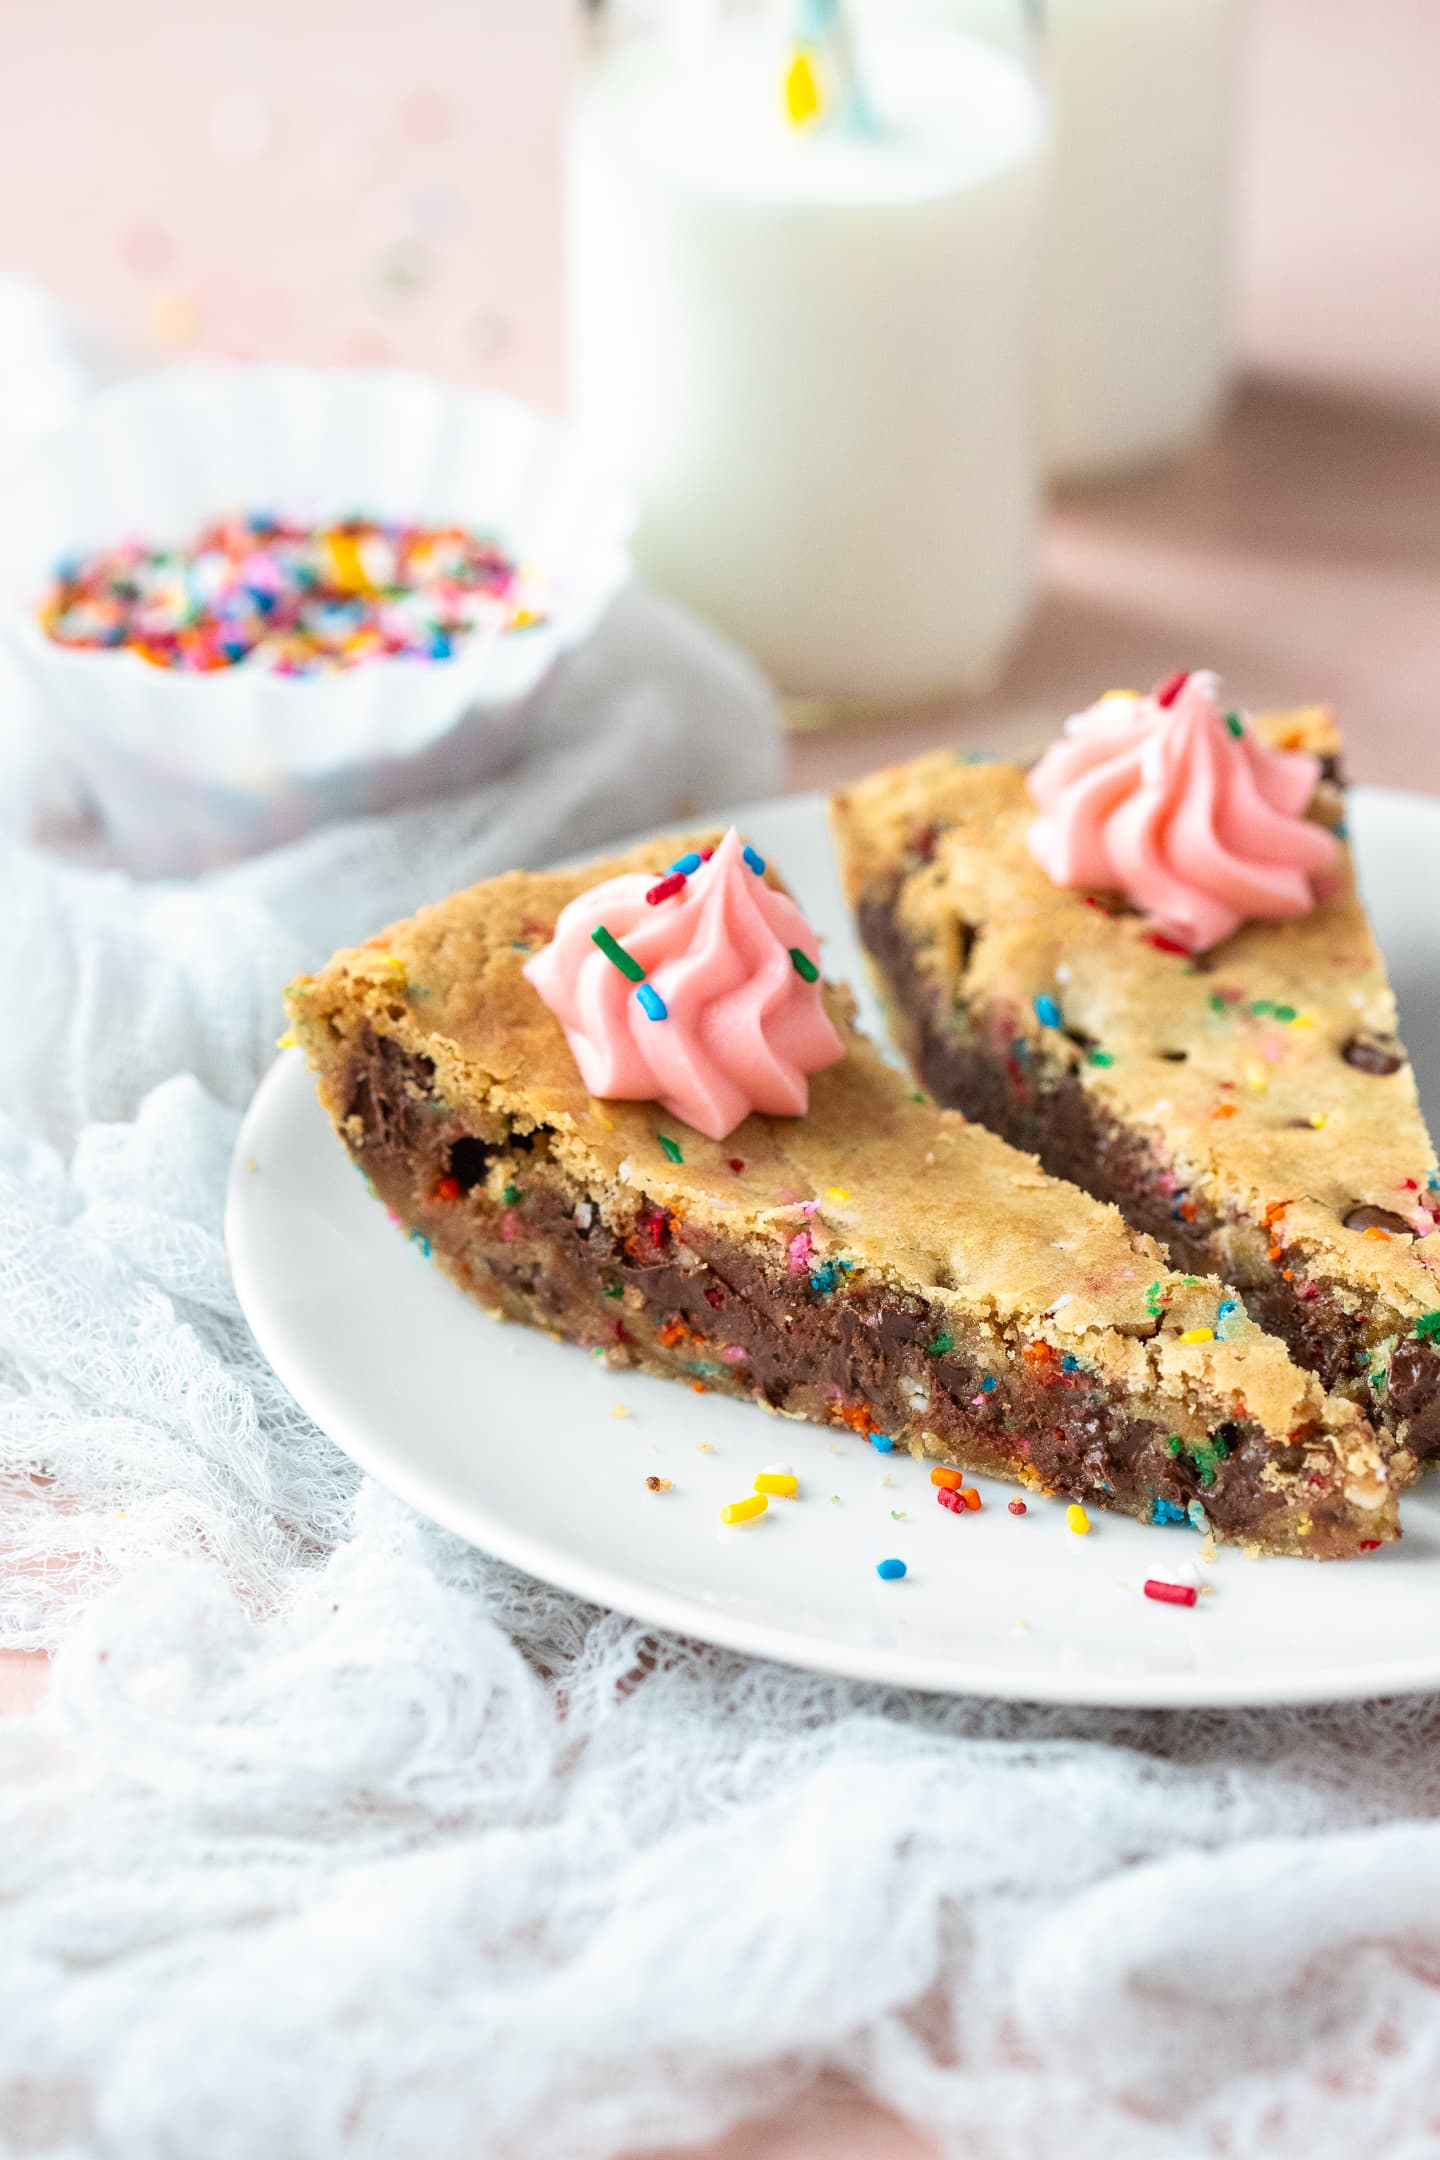 Front-angled view of two slices of cookie cake on a plate, with glasses of milk and a bowl of sprinkles in the background.